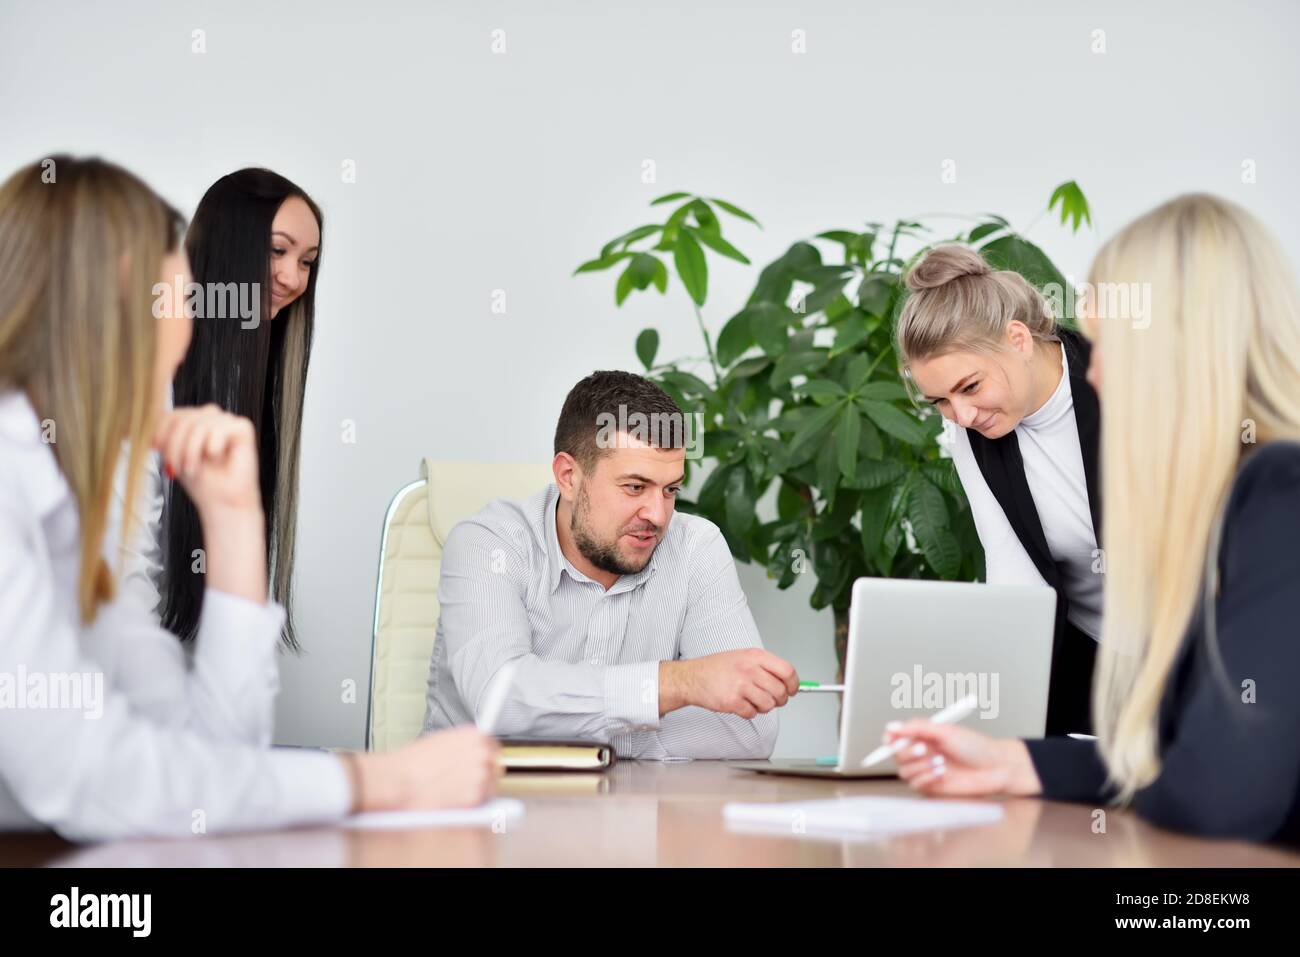 CEO at a meeting with female employees explains new ideas using a laptop Stock Photo